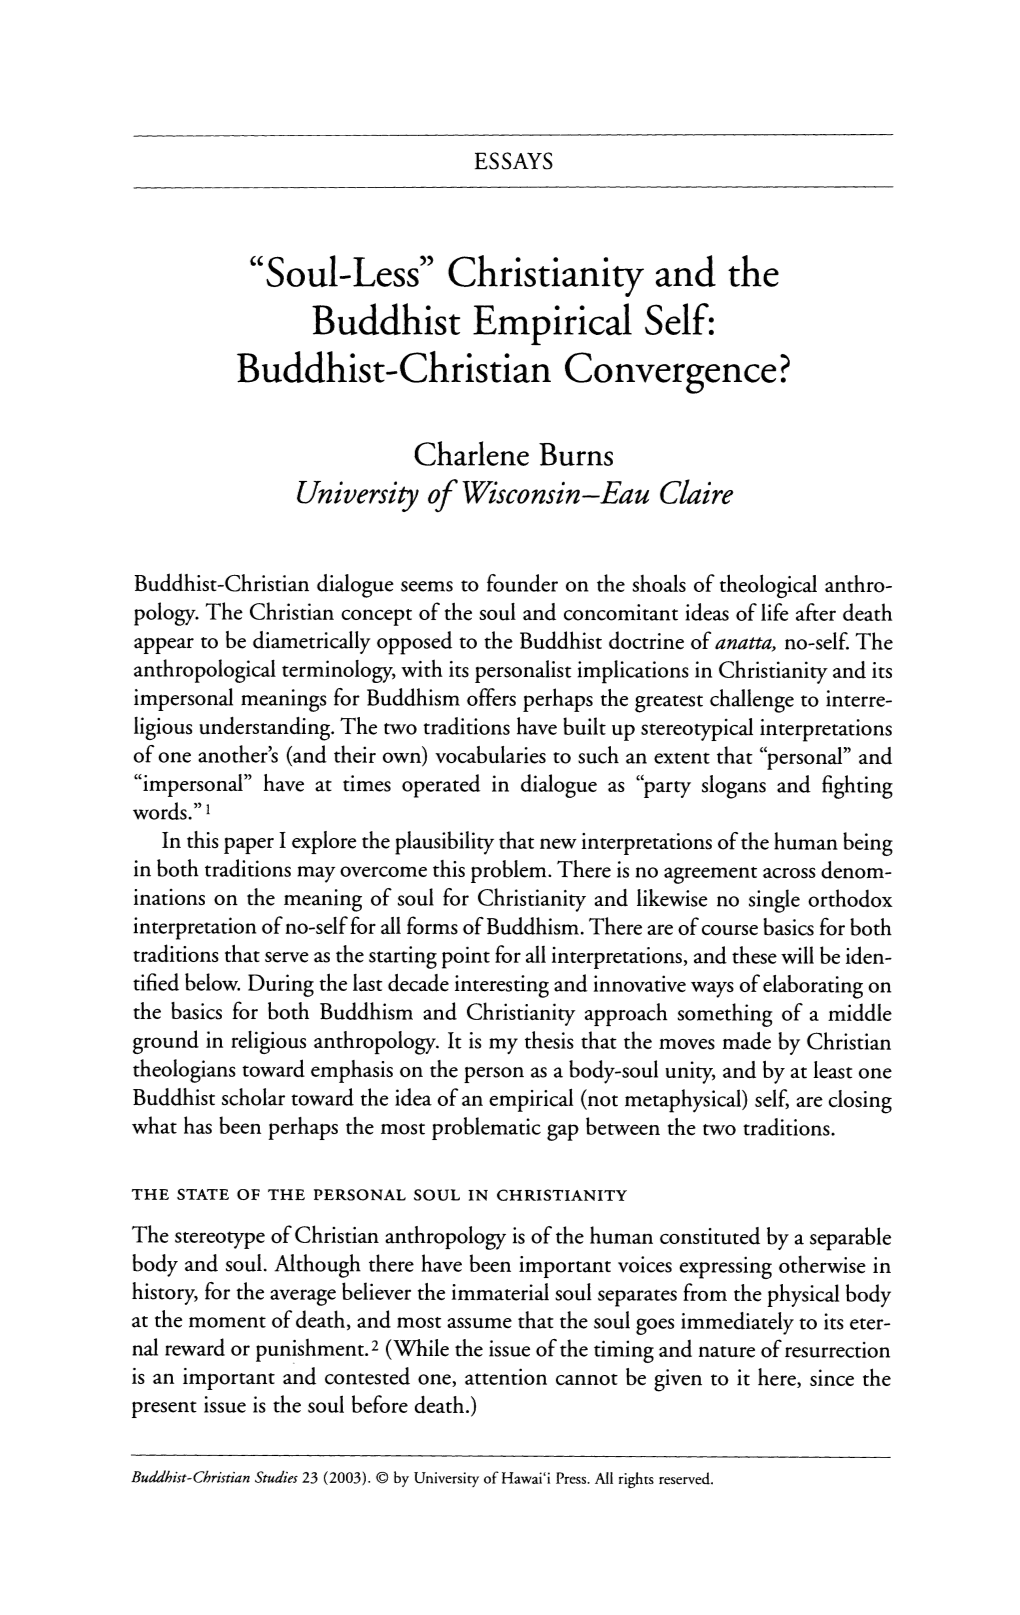 “Soul-Less” Christianity and the Buddhist